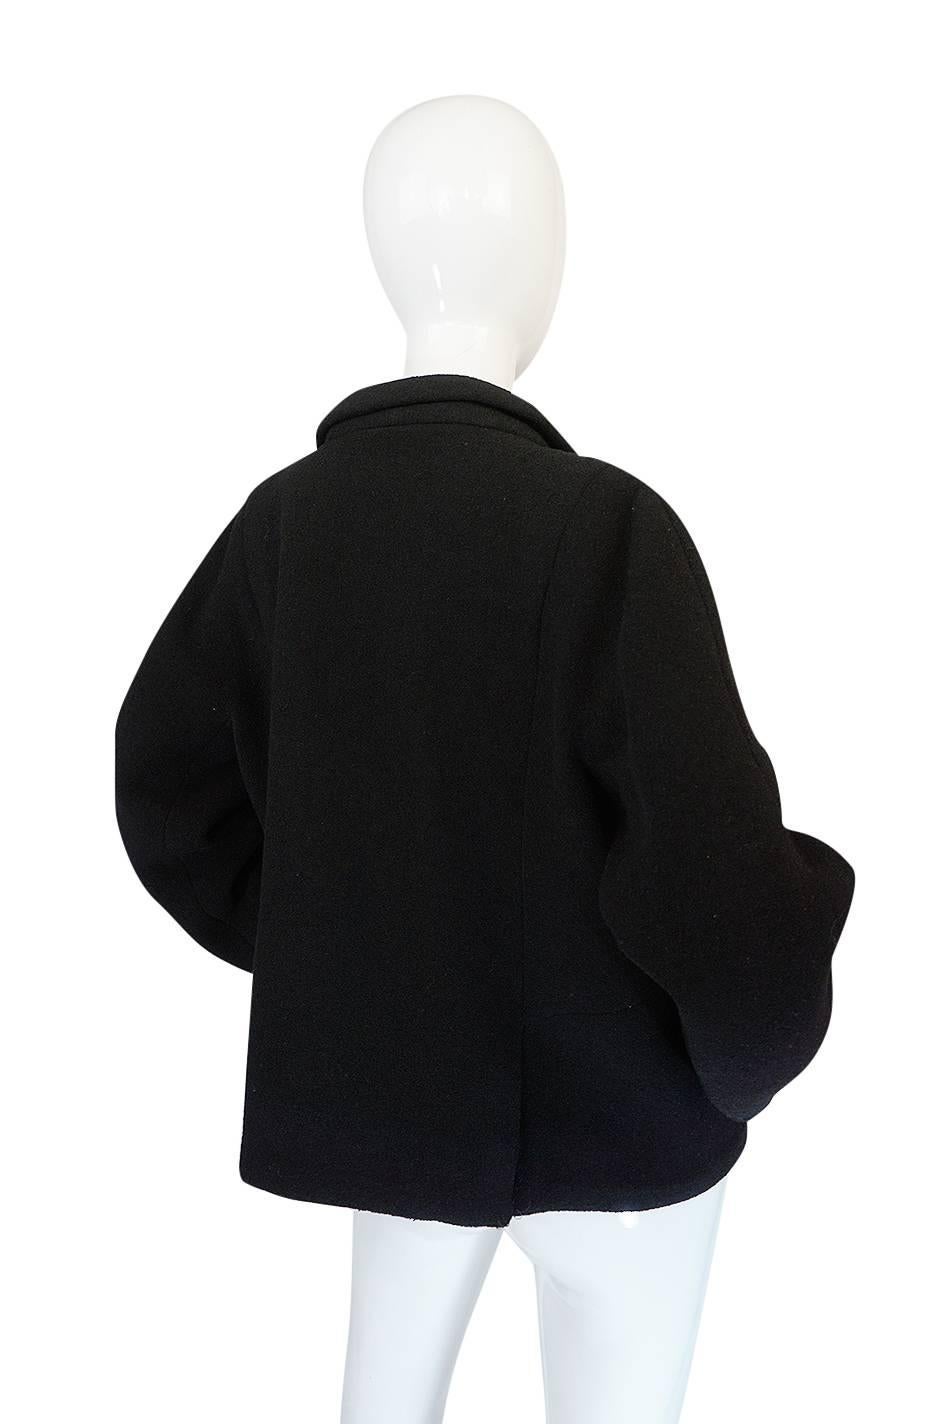 Women's 1950s Numbered Haute Couture Black Balenciaga Jacket